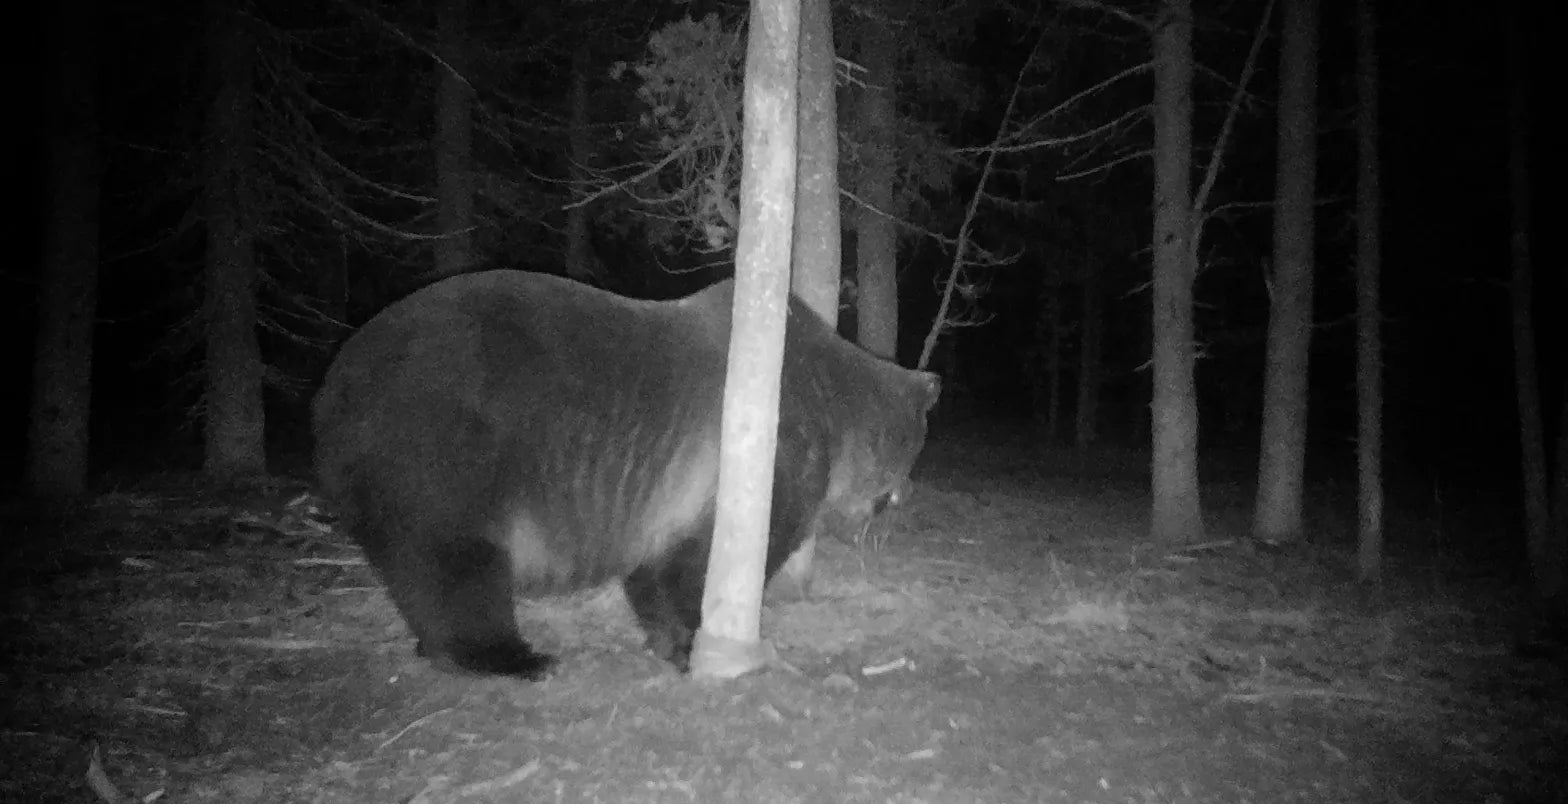 Grizzly 566, captured here on a remote trail cam, was the heaviest grizzly bear assessed in the Greater Yellowstone Ecosystem in 46 years. (U.S. Geological Survey/IGBST)